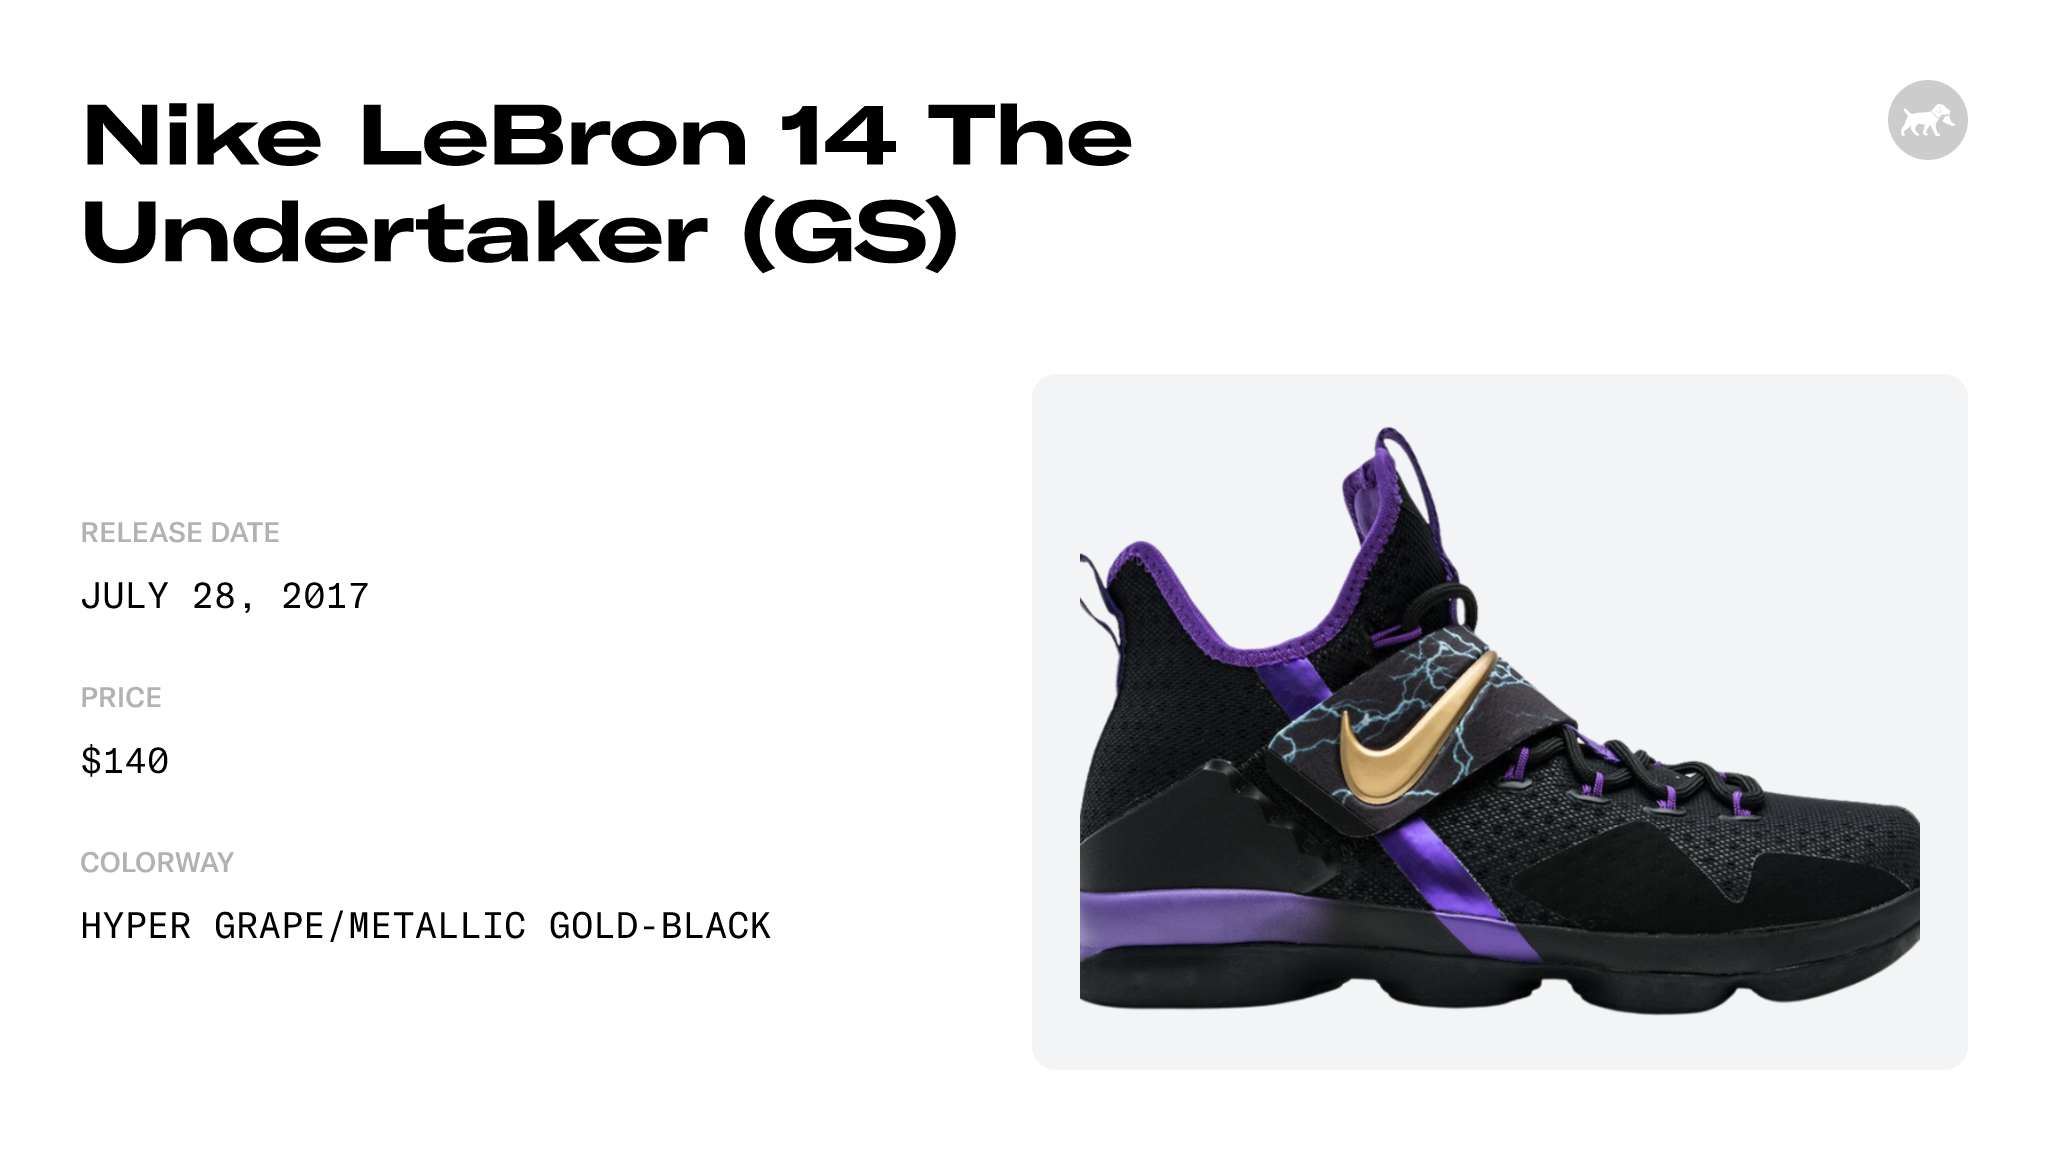 Nike LeBron 14 The Undertaker (GS) - AA3258-590 Raffles and Release Date